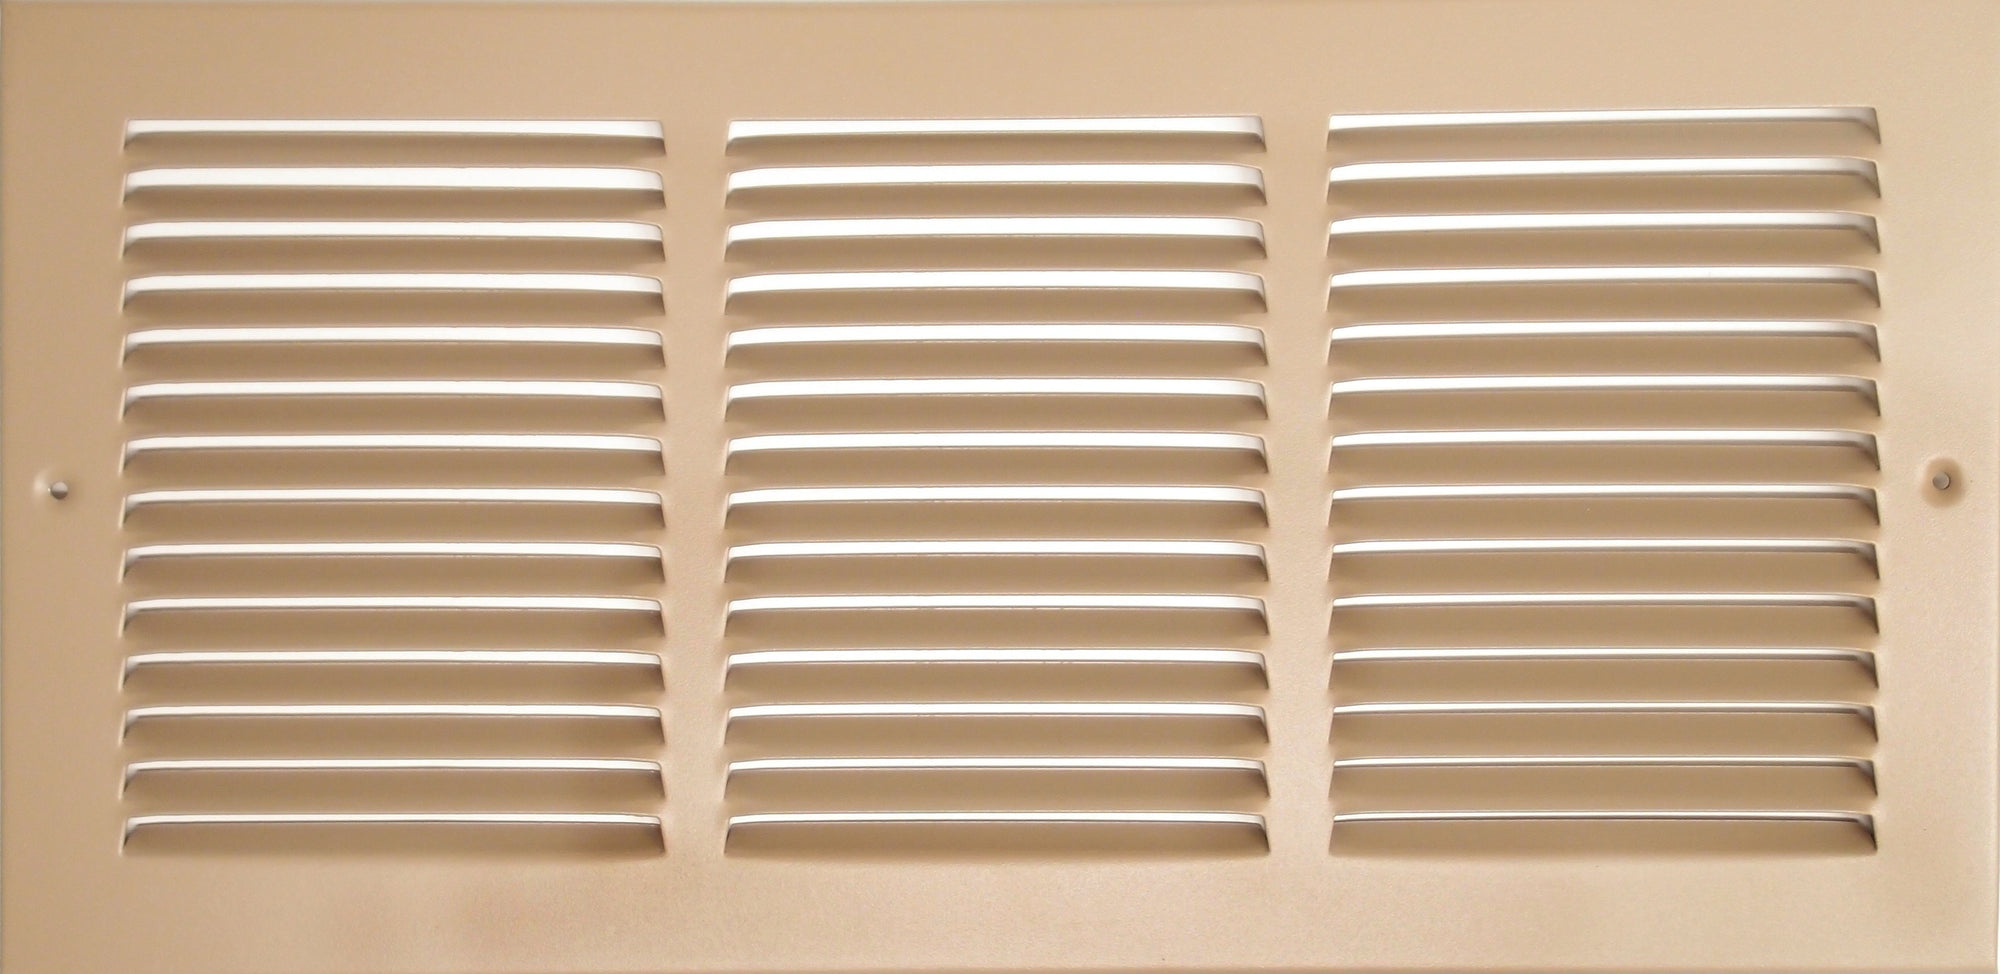 18" X 14" Air Vent Return Grilles - Sidewall and Ceiling - Steel